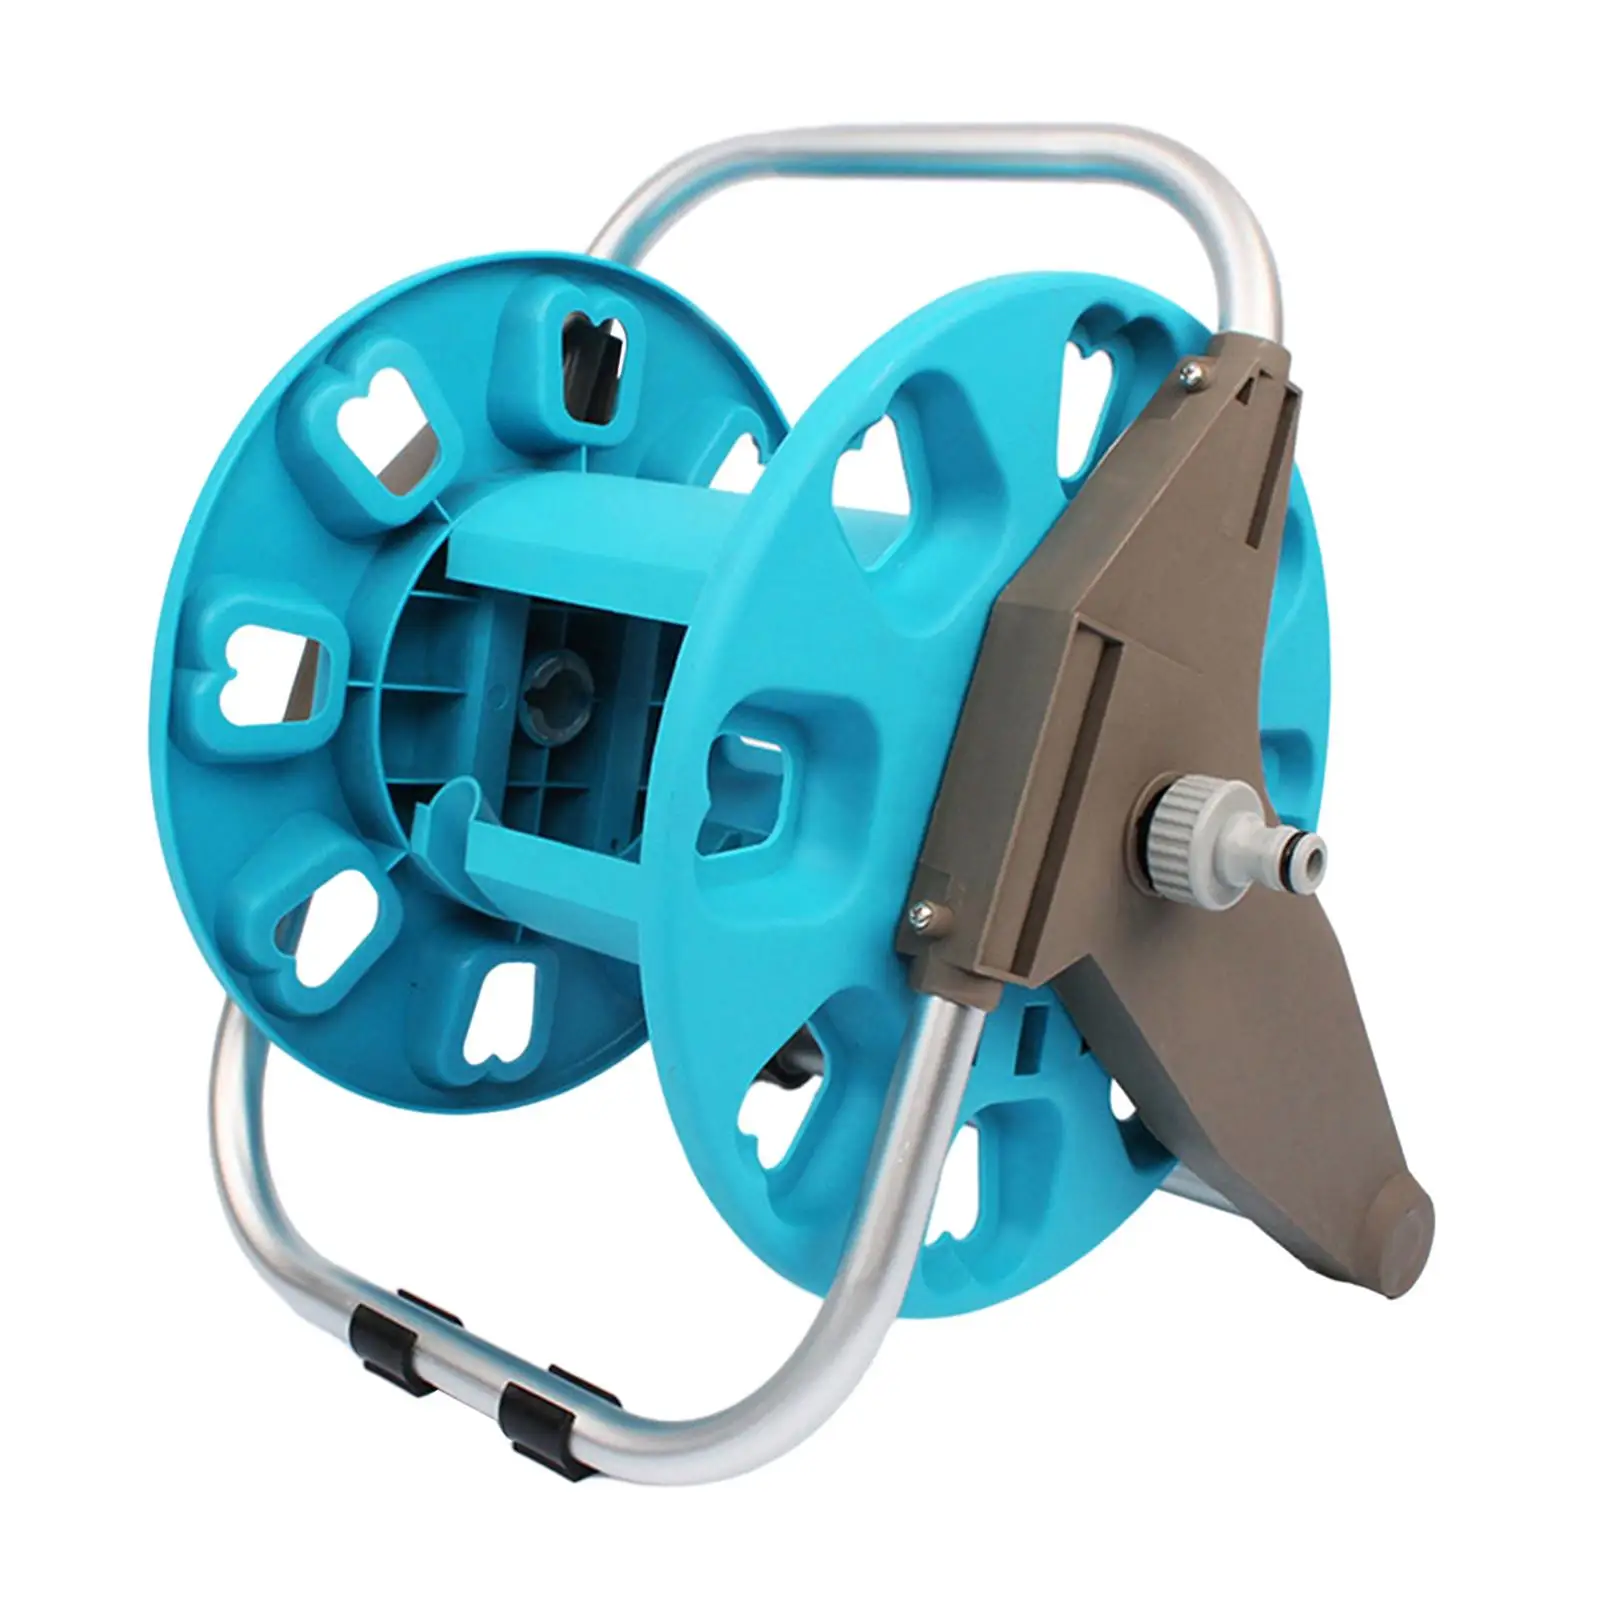 Garden Water Pipe Hose Reel Portable Durable Construction Water Hose Storage Stand Rack Holds 98.4 ft Hose Hose Pipe Organizer